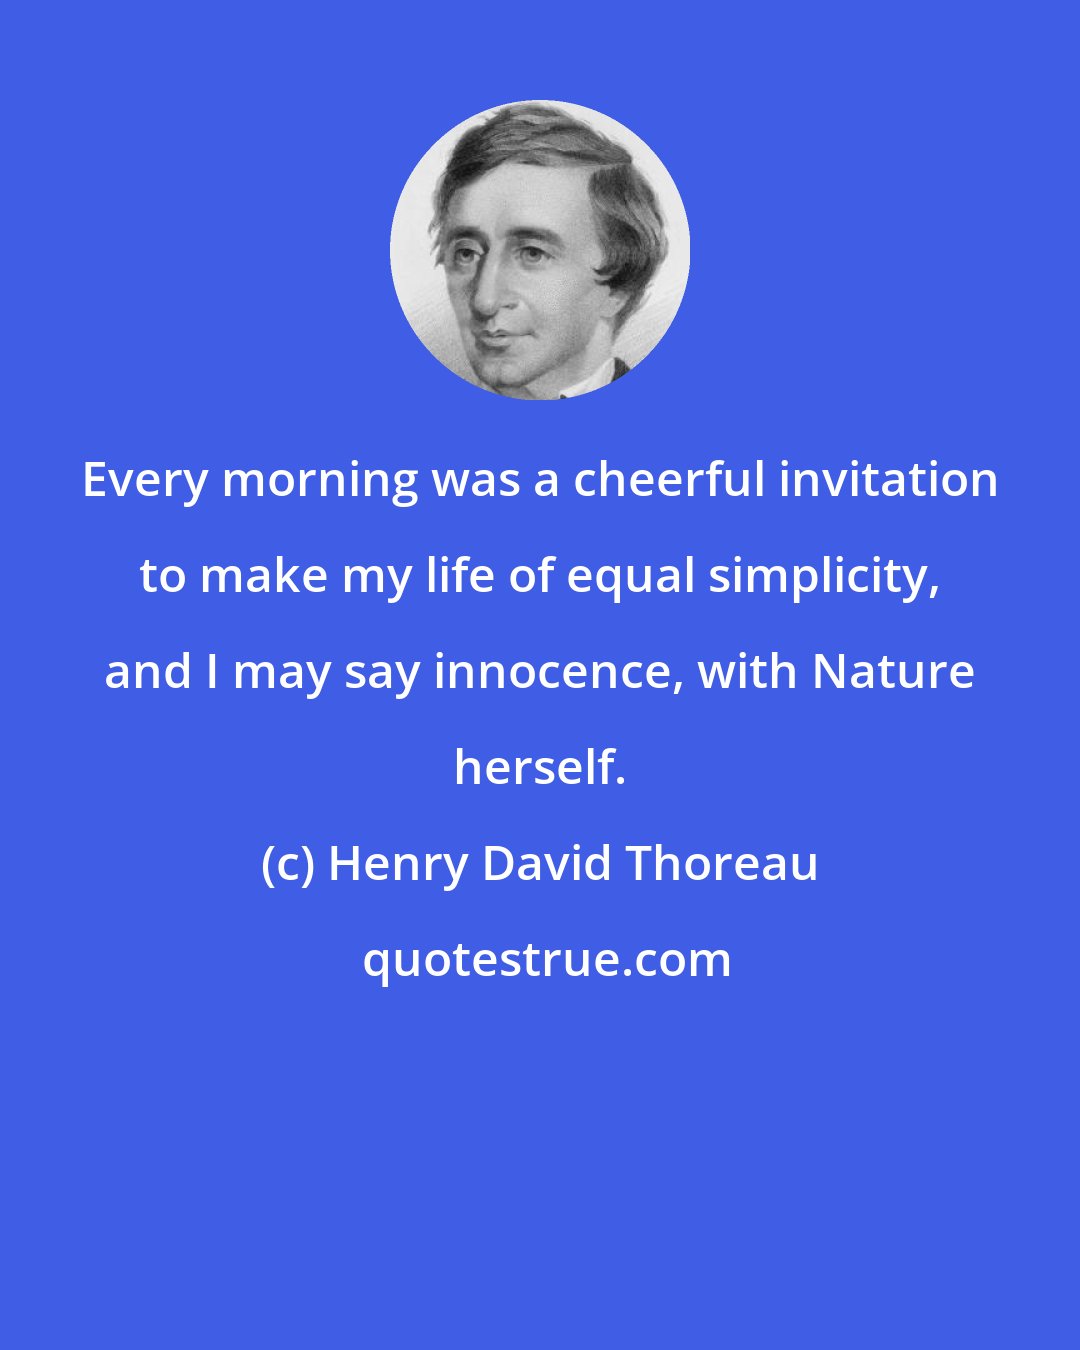 Henry David Thoreau: Every morning was a cheerful invitation to make my life of equal simplicity, and I may say innocence, with Nature herself.